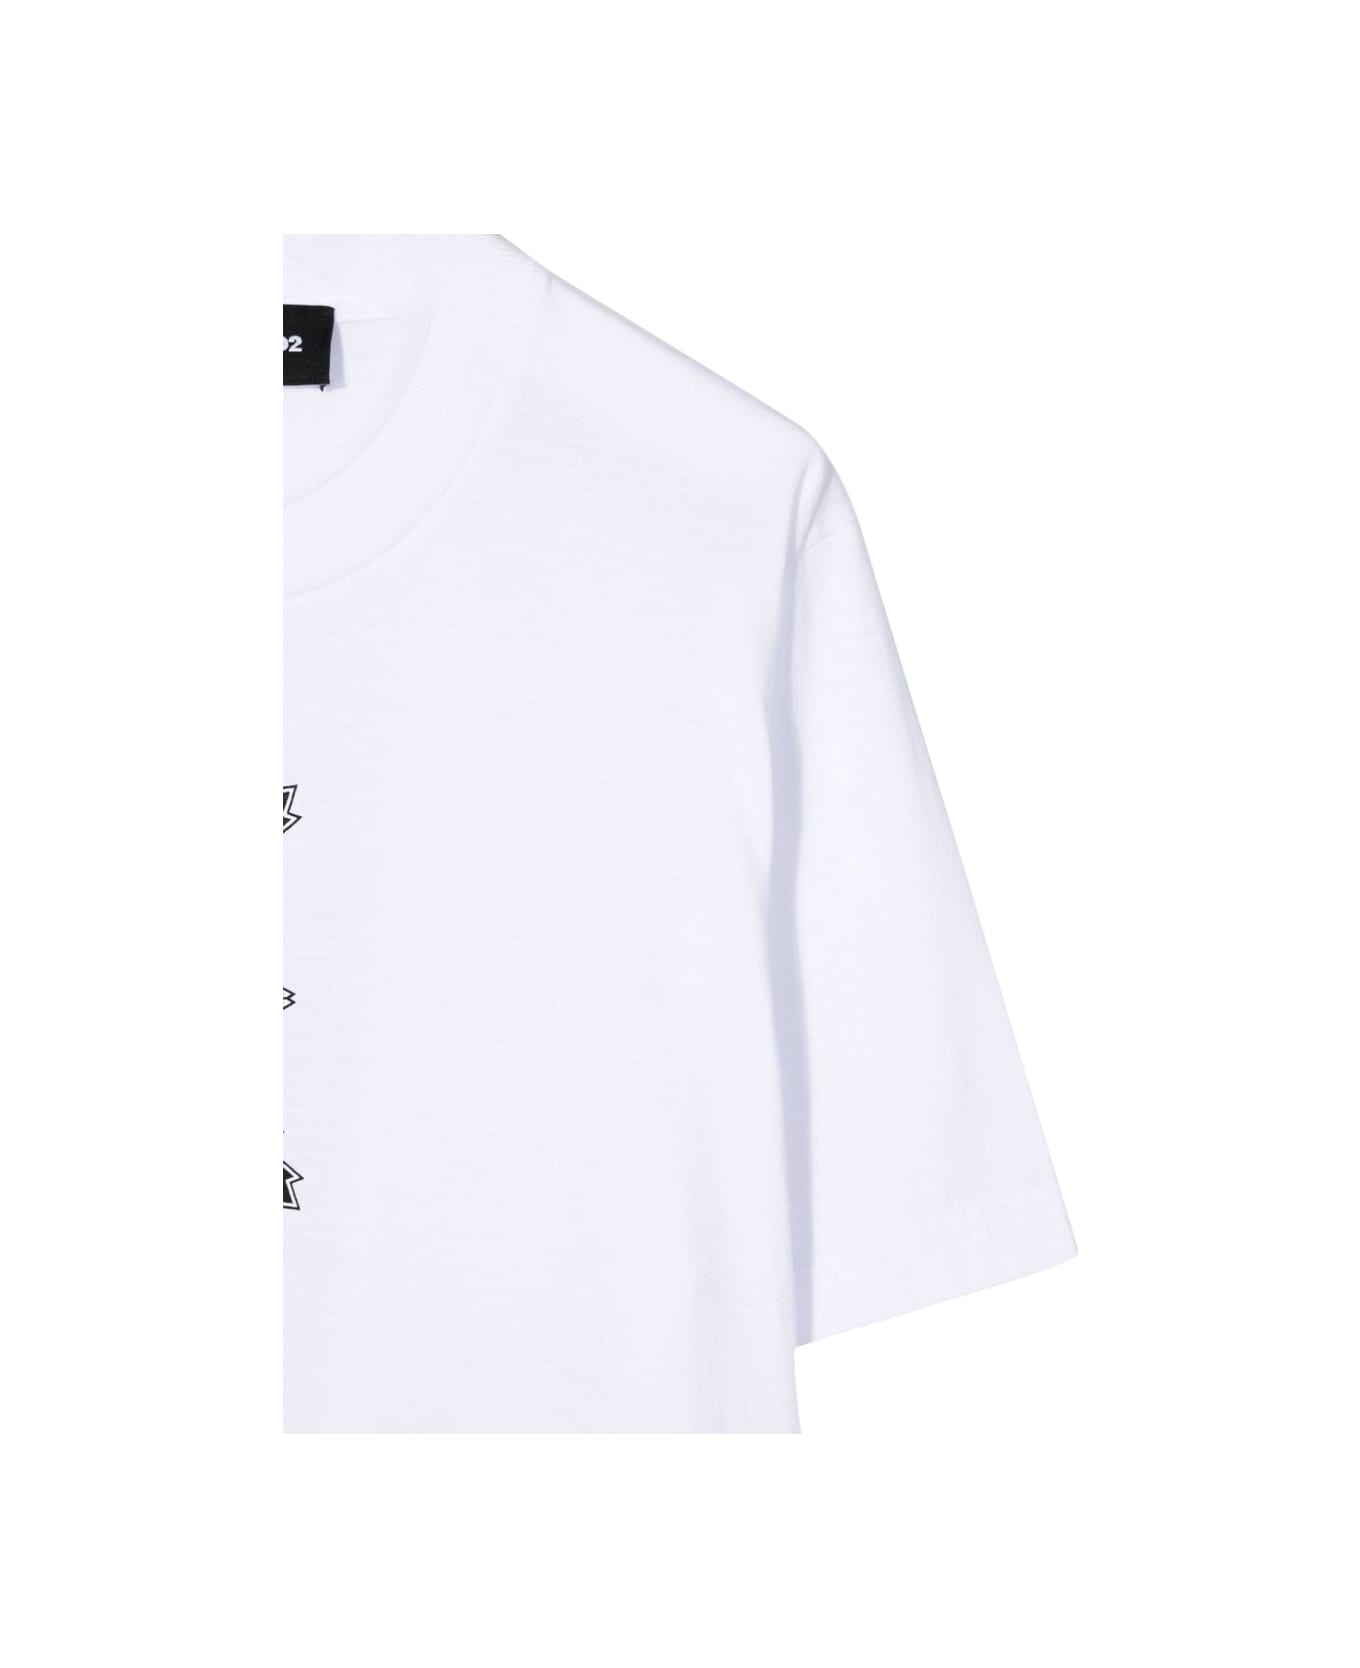 Dsquared2 T-shirt Logo On The Back And Front Leaves - WHITE